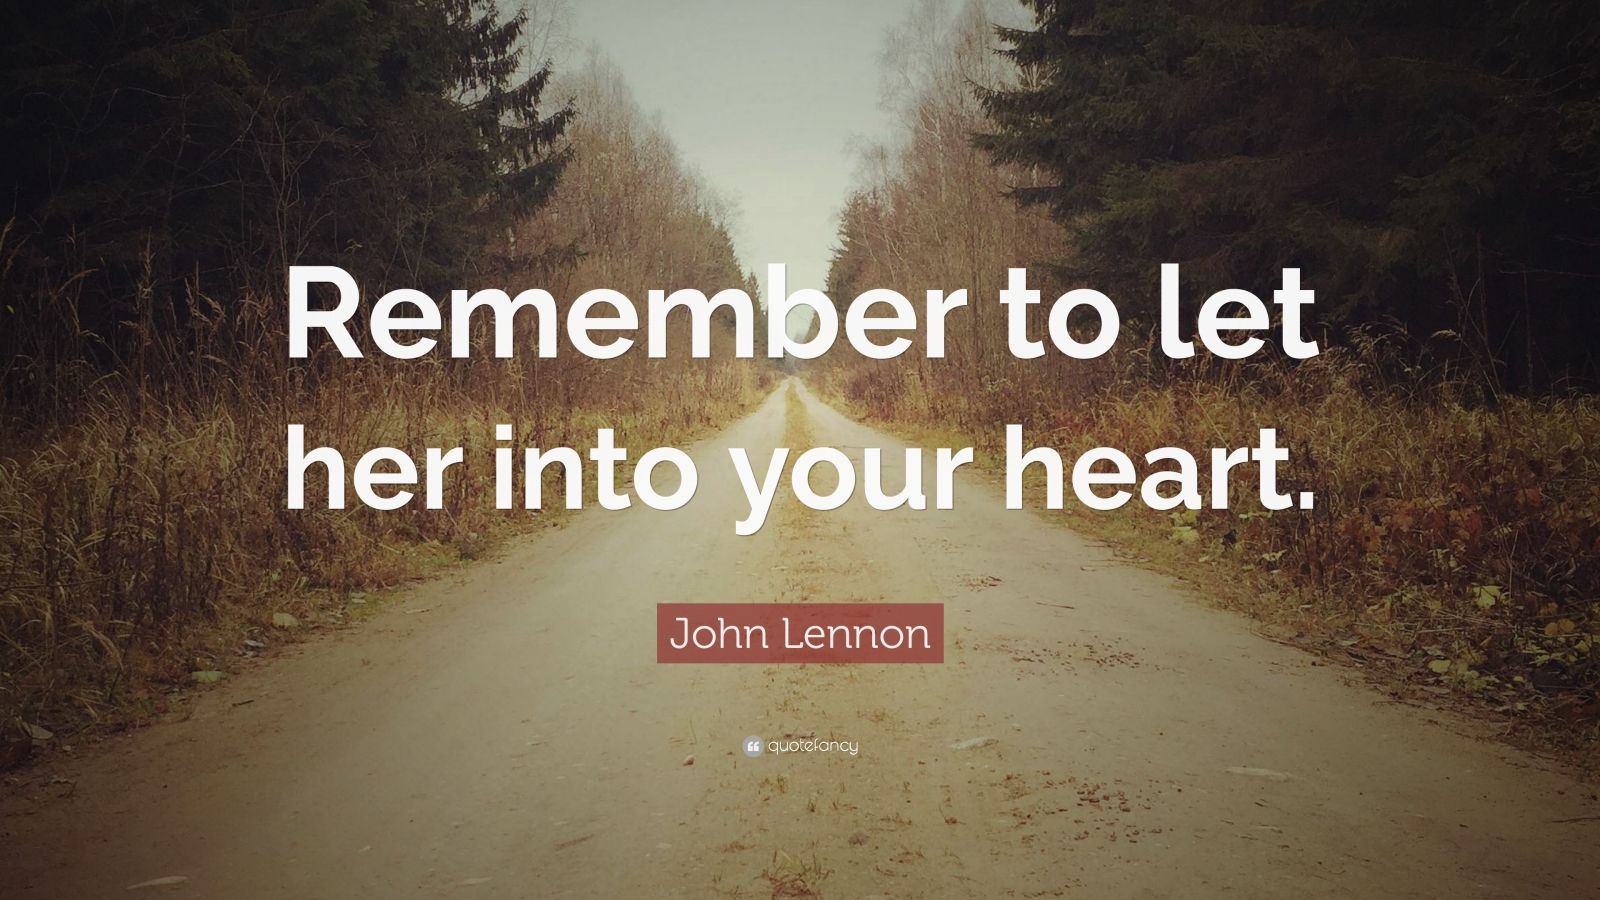 John Lennon Quote: “Remember to let her into your heart.” (12 ...